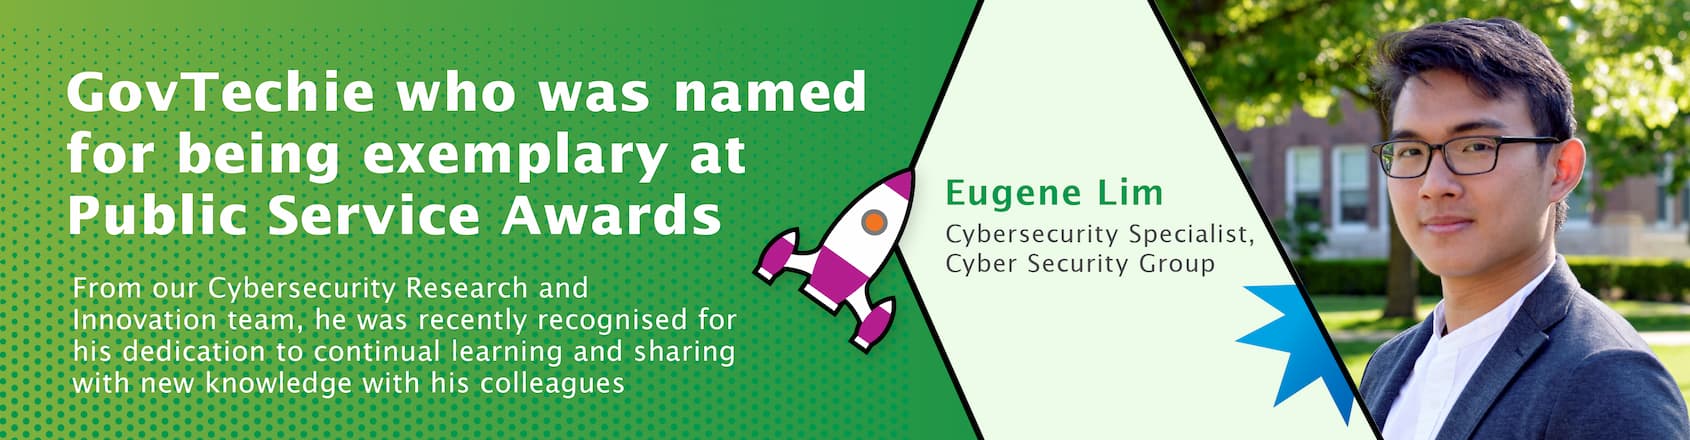 Cybersecurity Specialist Eugene Lim recognised at the Public Service Awards